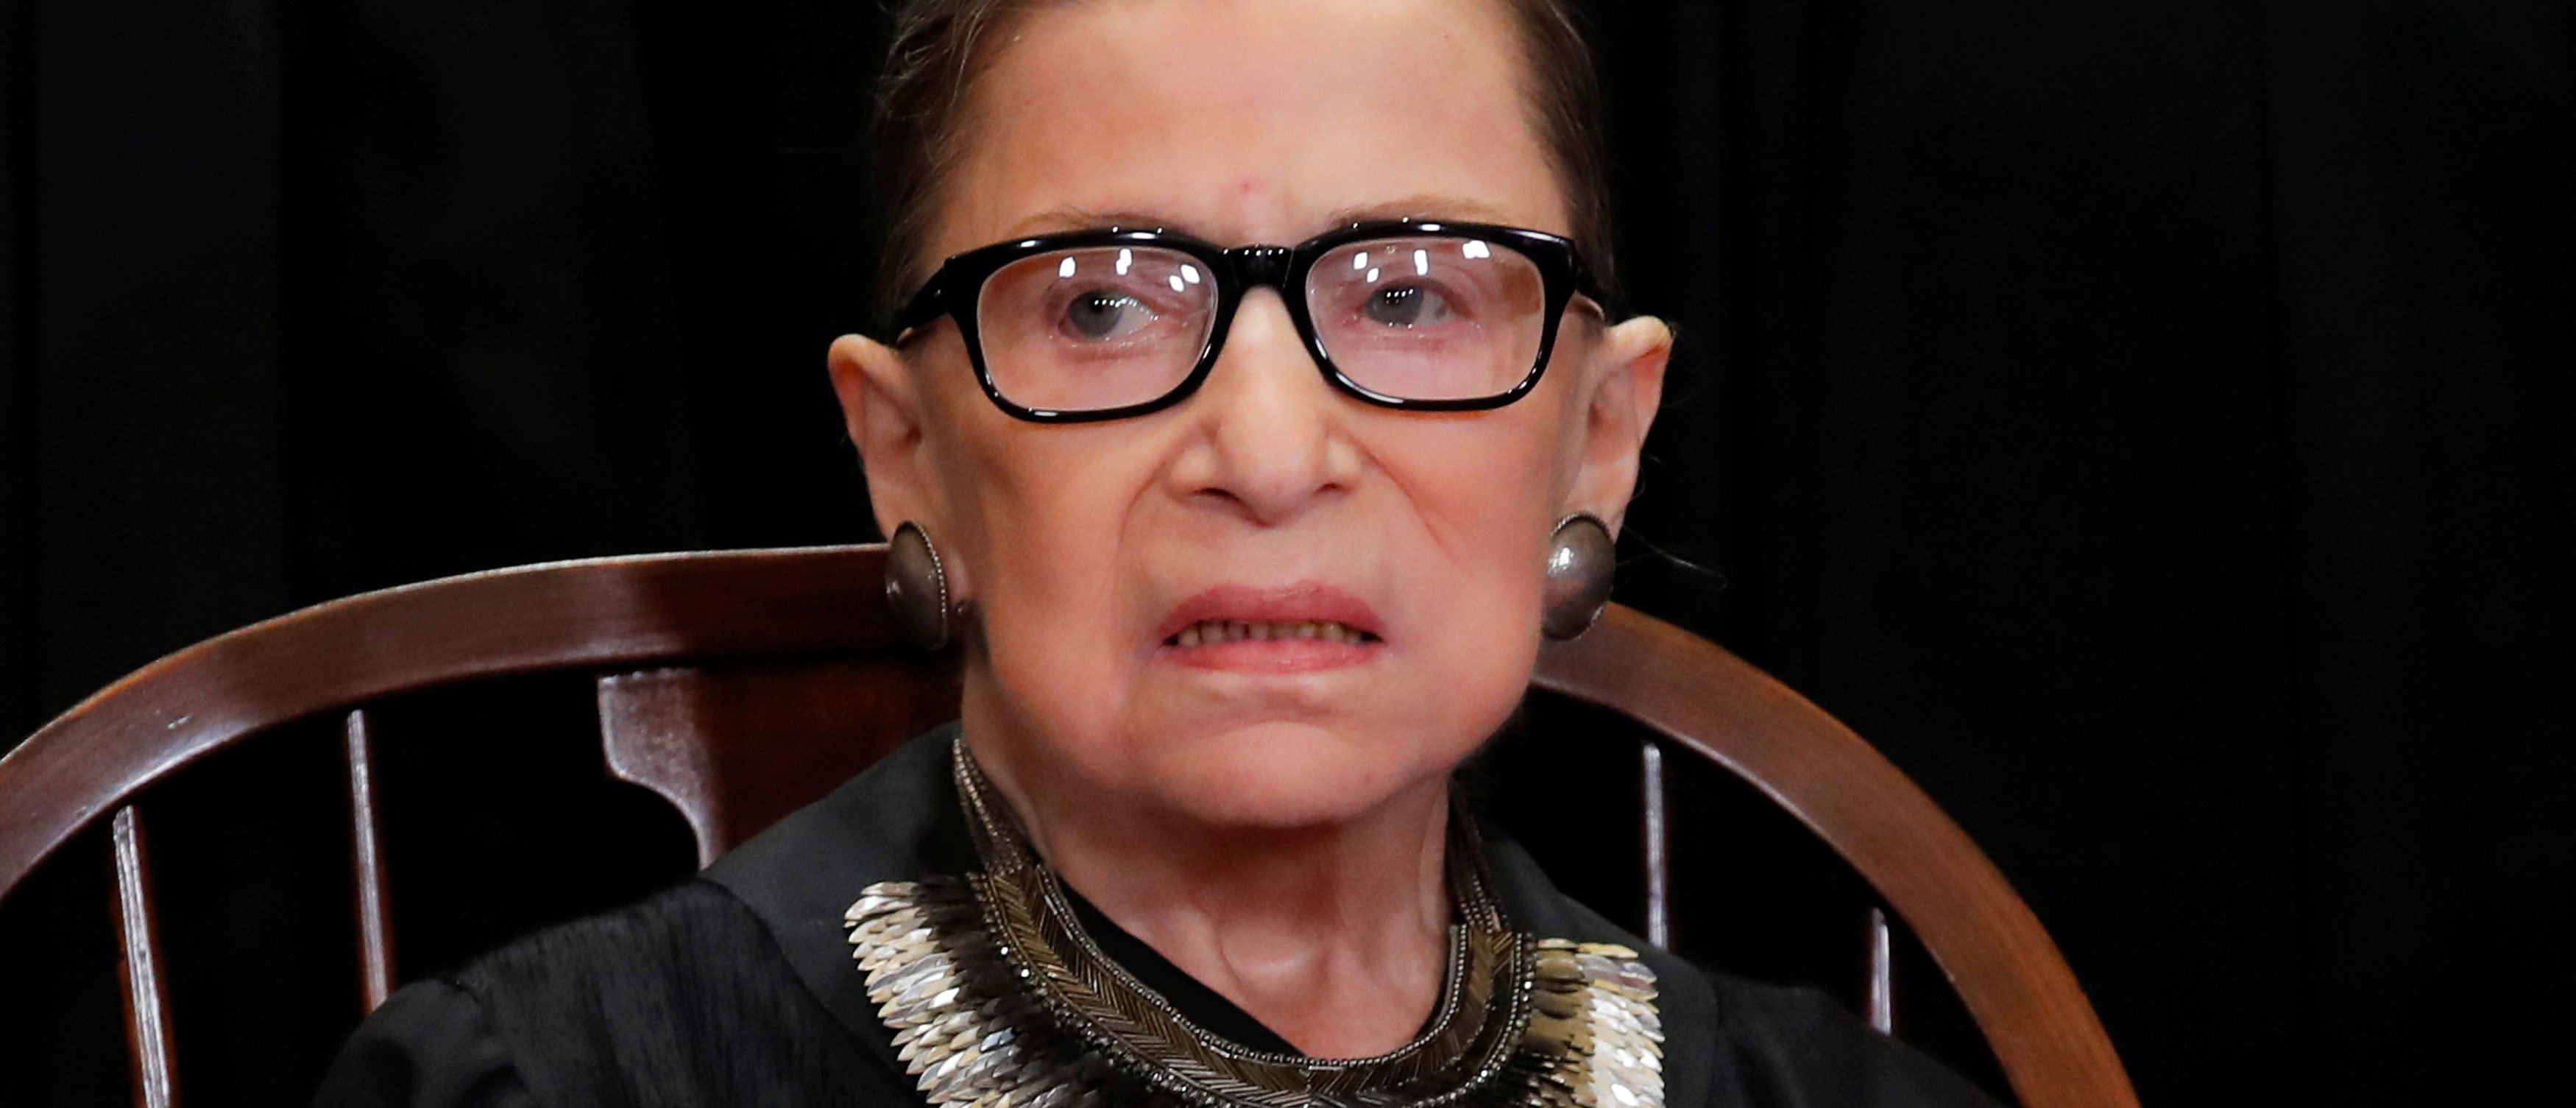 Justice Ruth Bader Ginsburg during a group portrait session for the full Supreme Court on November 30, 2018. (Reuters/Jim Young)